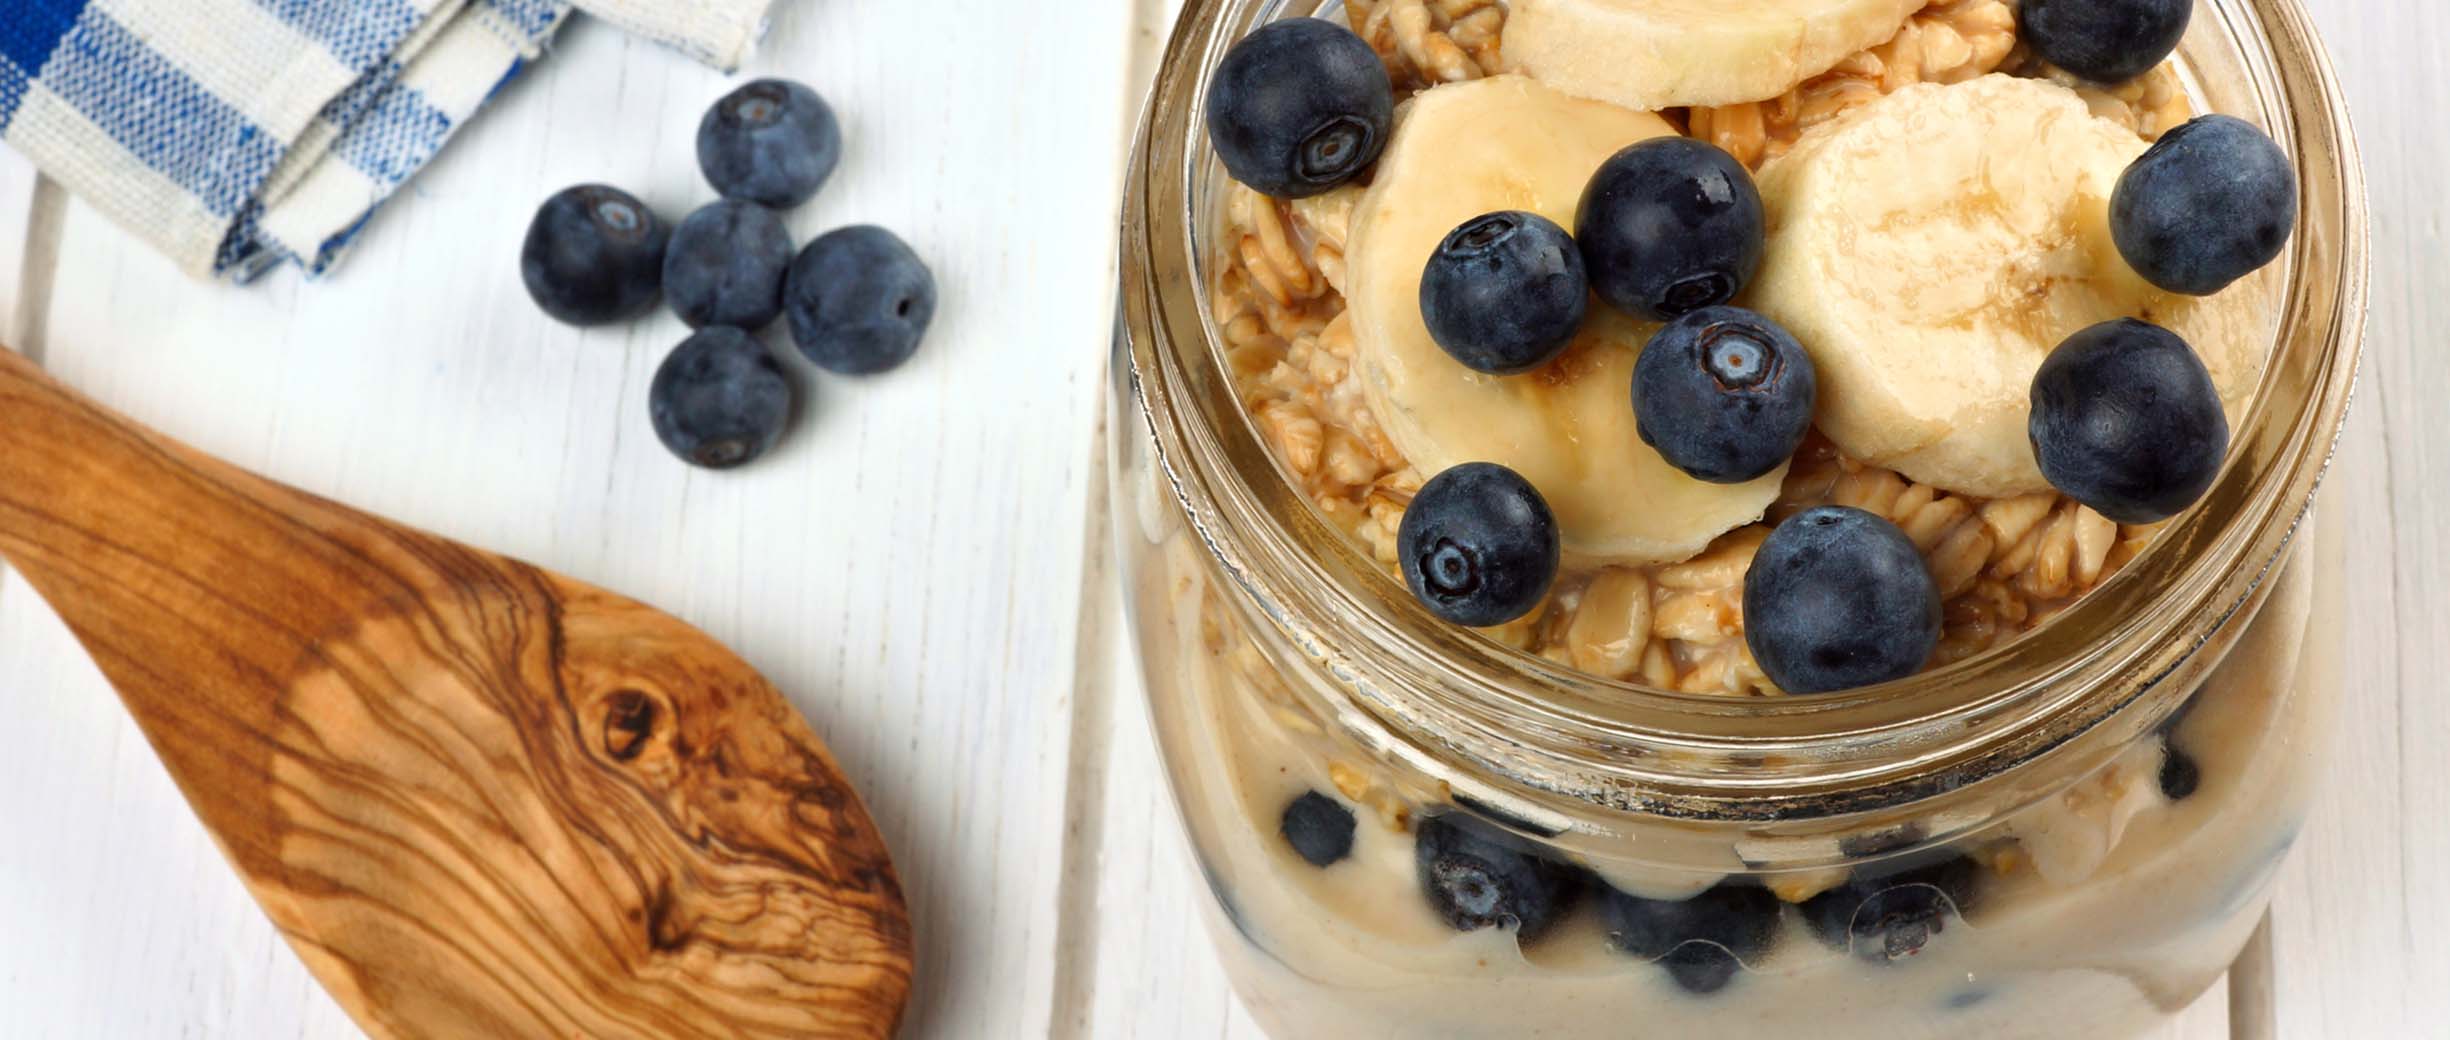 16 Brilliant Breakfast Ideas to Make Ahead of Time